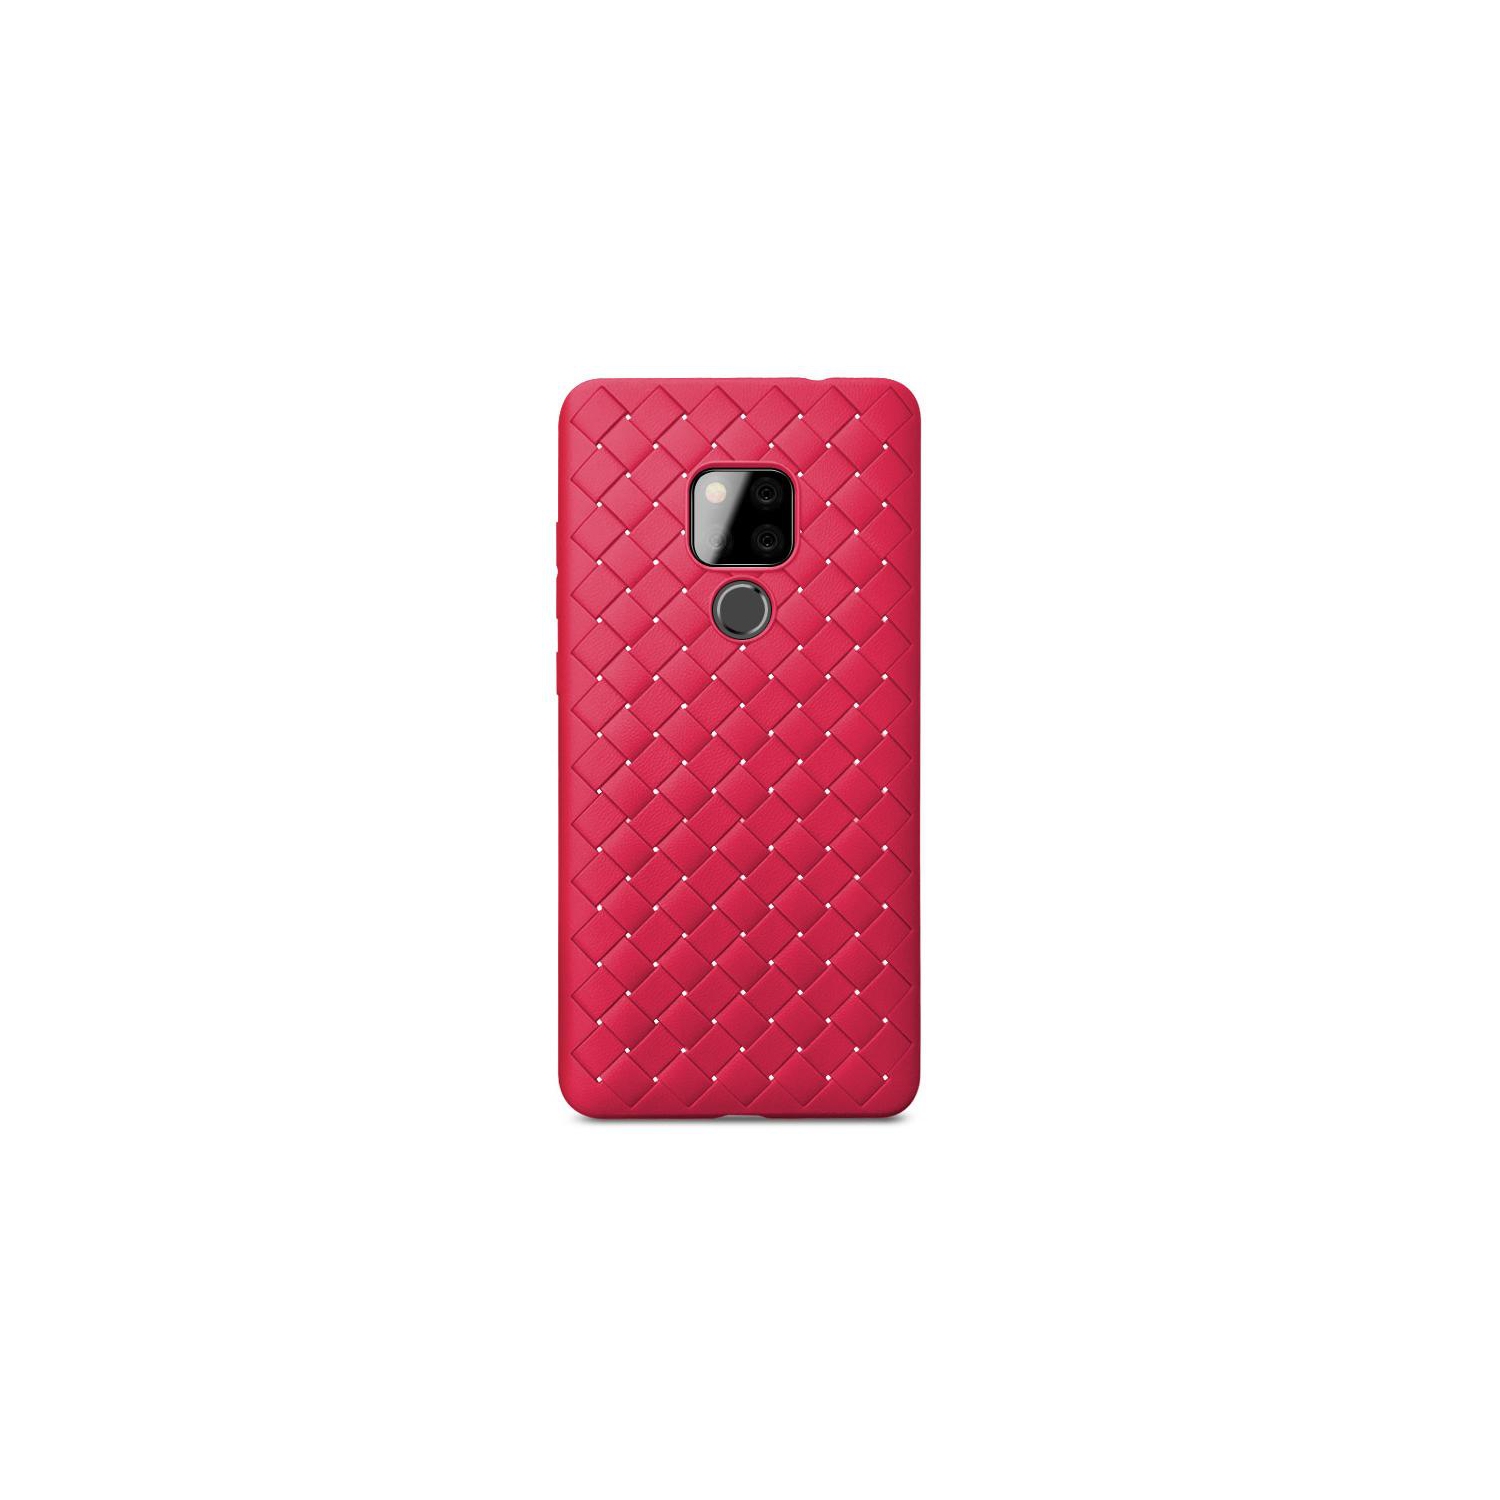 PANDACO Red Leather Cross-Weave Case for Huawei Mate 20